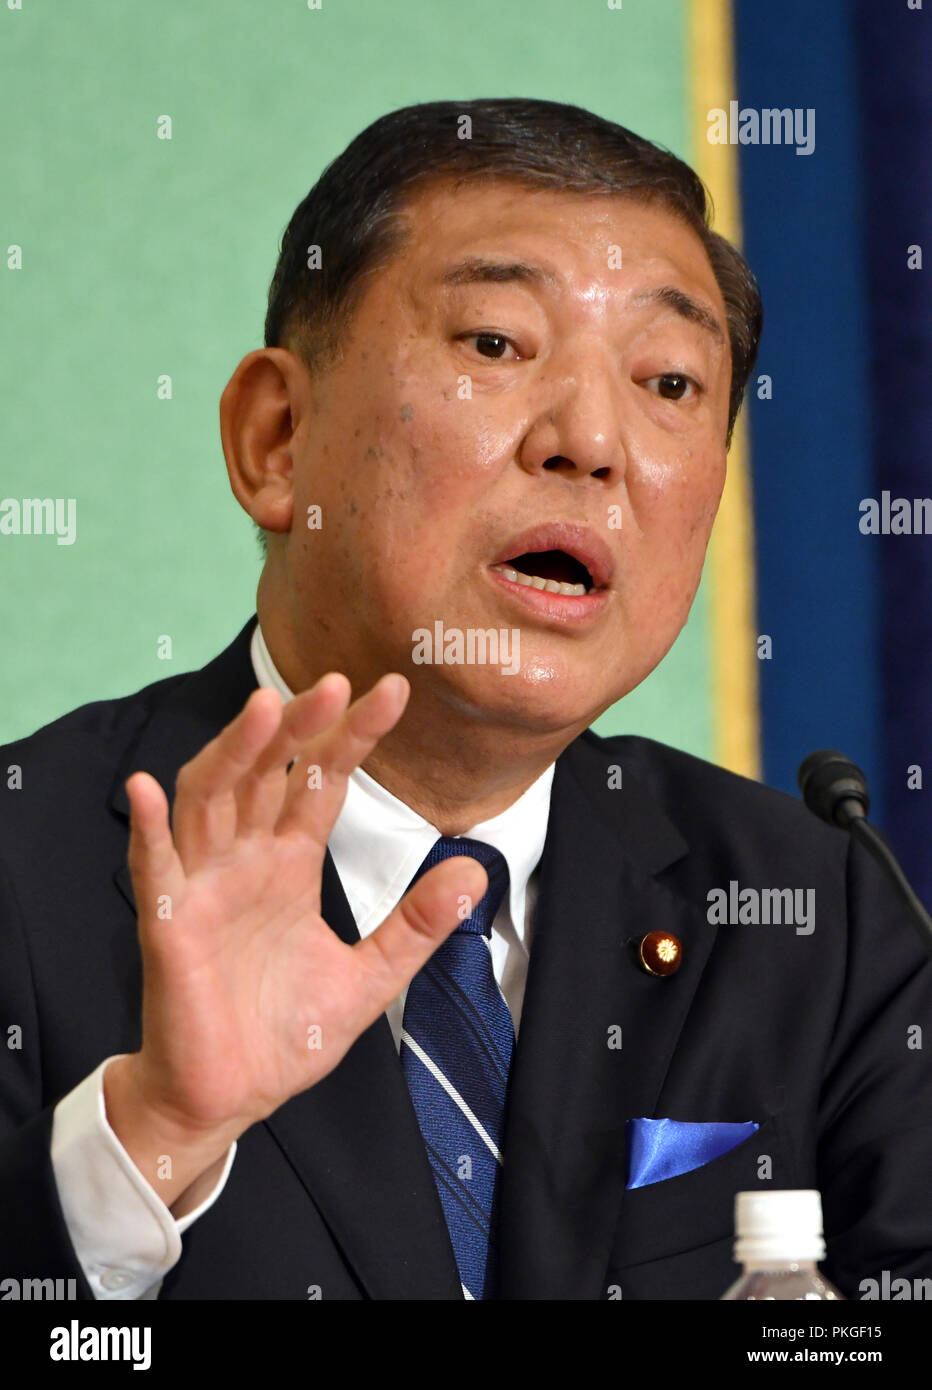 Tokyo, Japan. 14th Sep, 2018. Shigeru Ishiba, former secretary-general of the ruling Liberal Democratic Party, sets out his policies during a debate at the Japan National Press Club in Tokyo on Friday, September 14, 2018. Ishiba challenges Japans Prime Minister and incumbent party President Shinzo Abe in a race for the party presidency slated for September 20. Credit: Natsuki Sakai/AFLO/Alamy Live News Stock Photo